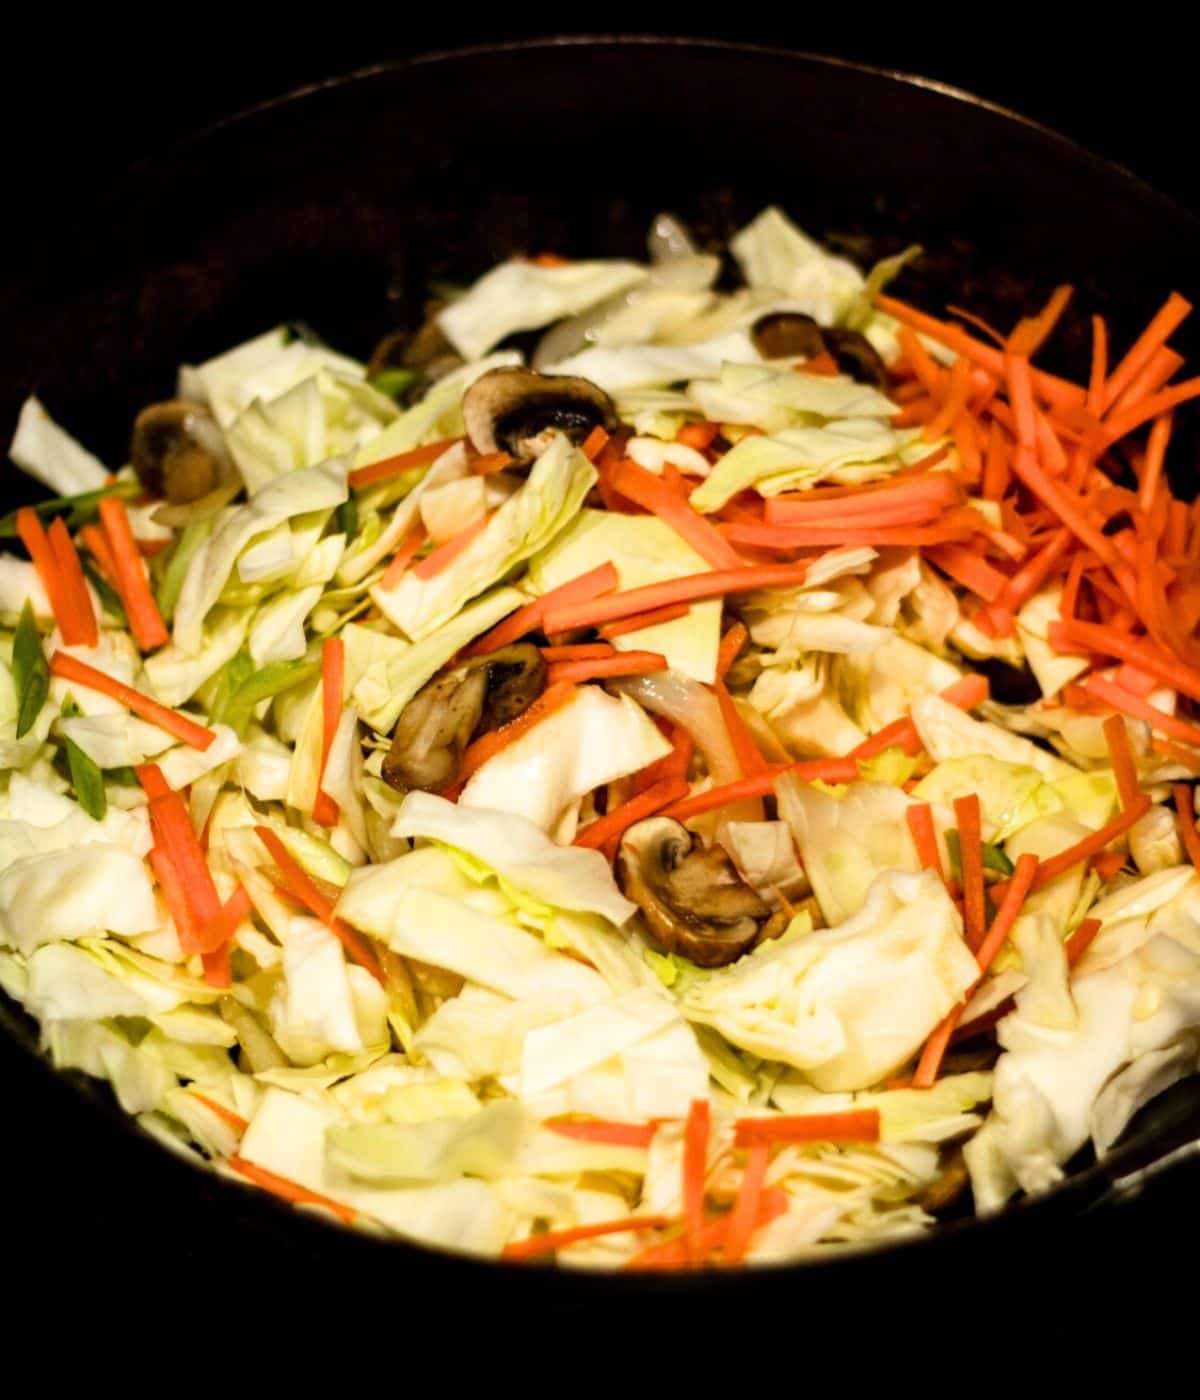 Adding cabbage and carrots to the wok.